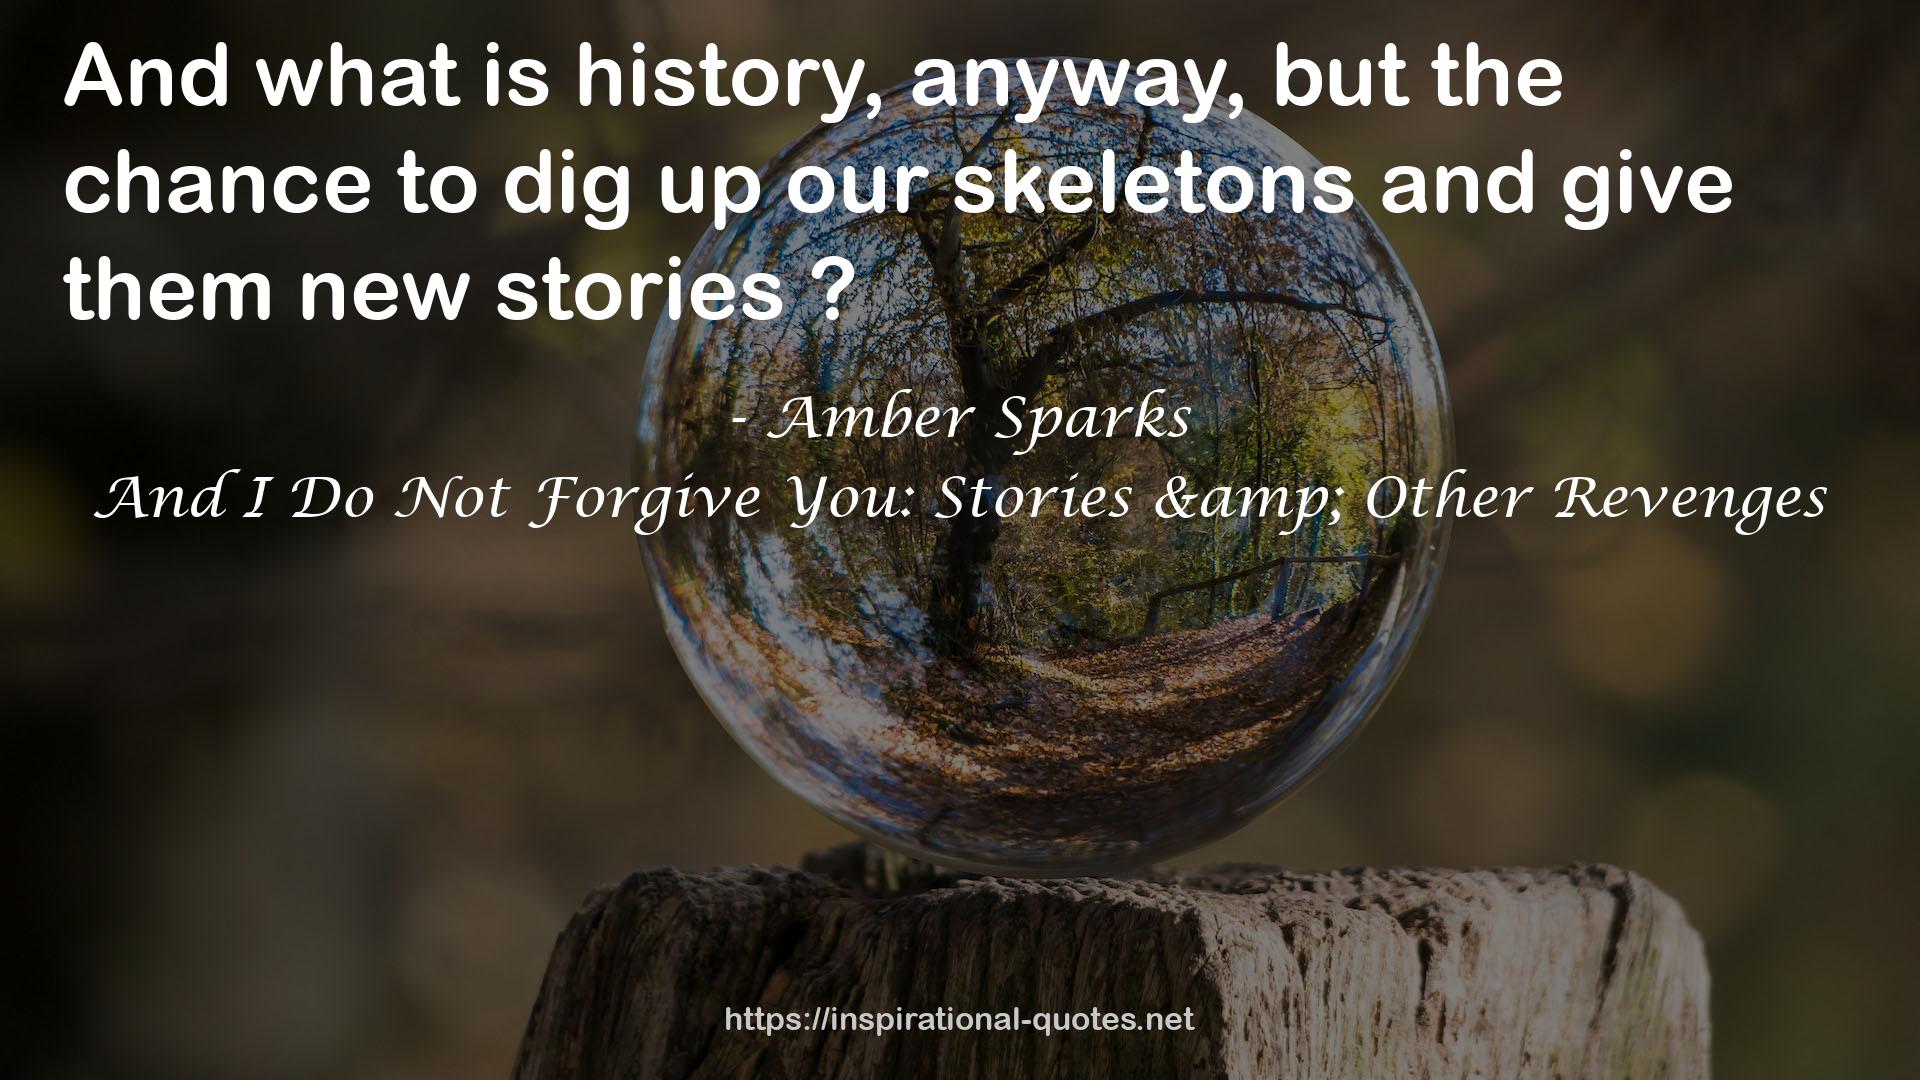 Amber Sparks QUOTES